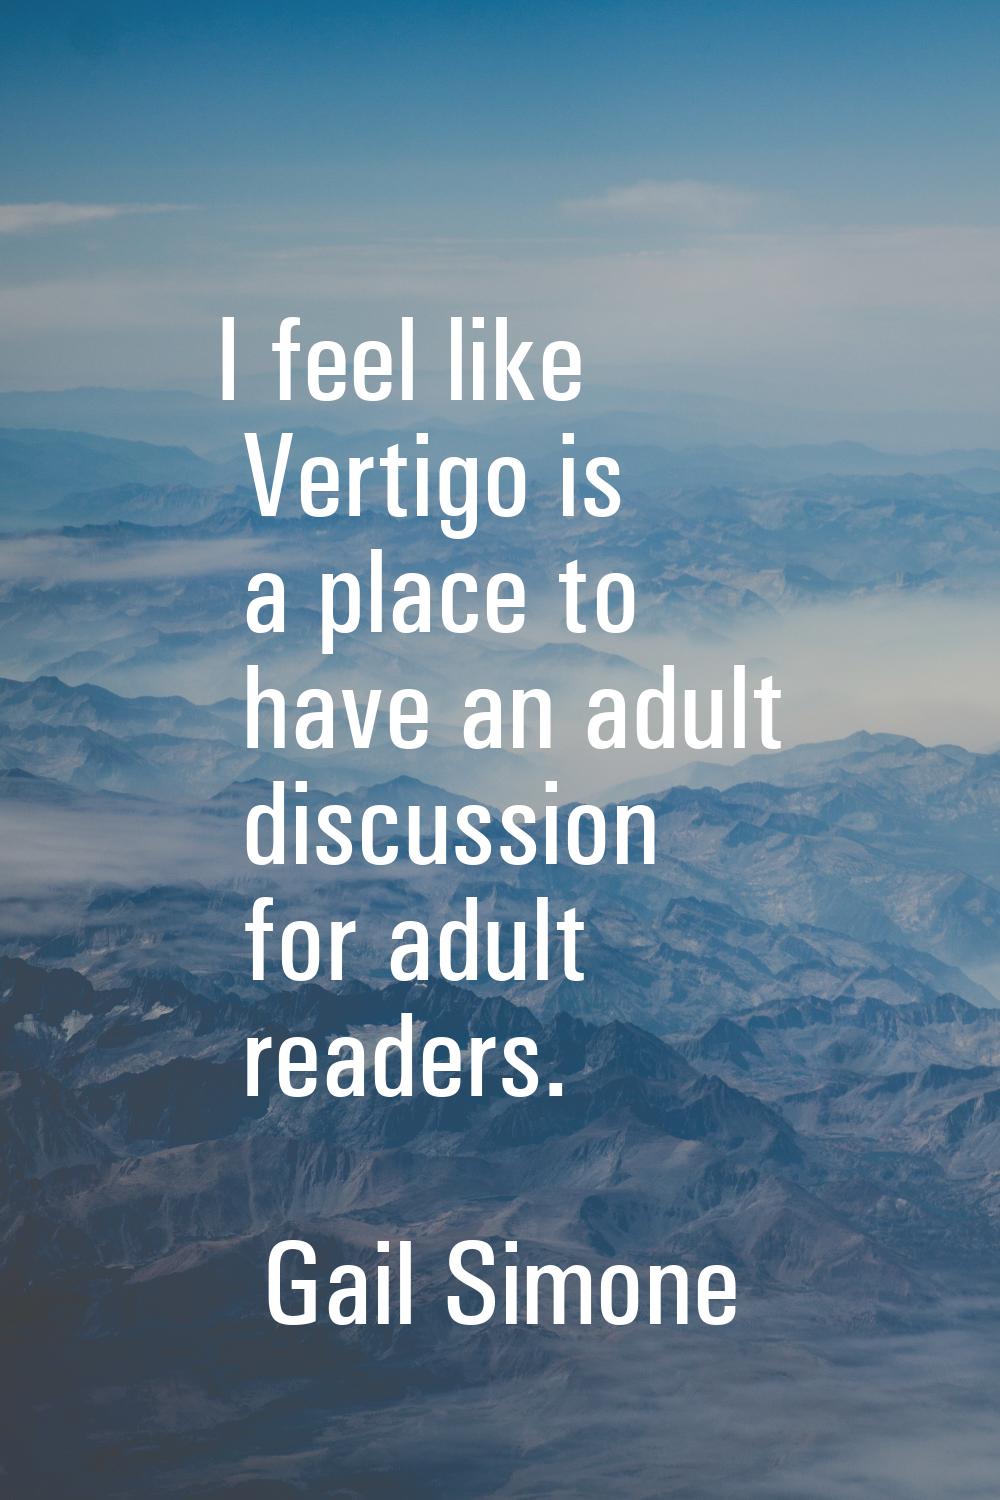 I feel like Vertigo is a place to have an adult discussion for adult readers.